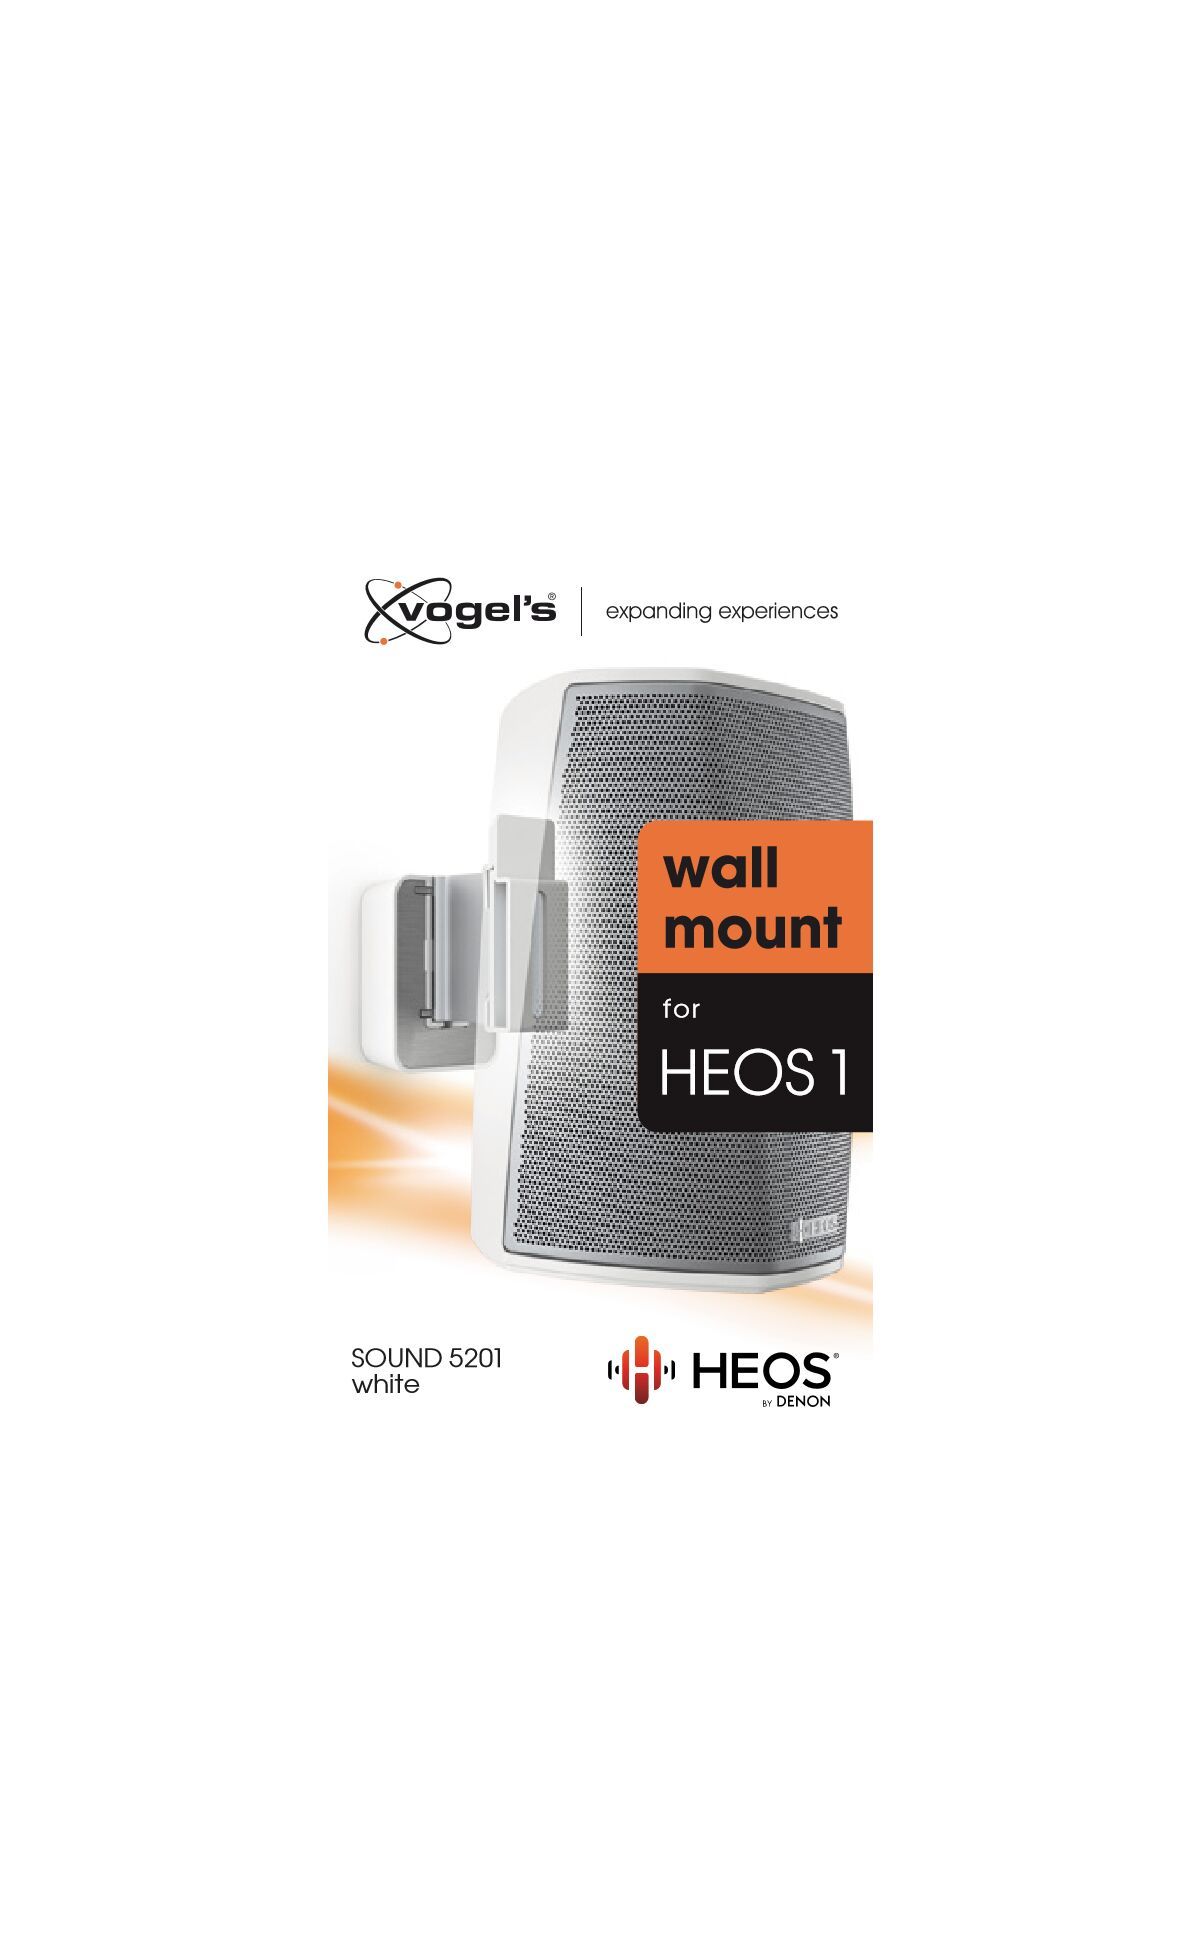 Vogel's SOUND 5201 Speaker Wall Mount for Denon HEOS 1 (white) - Packaging front